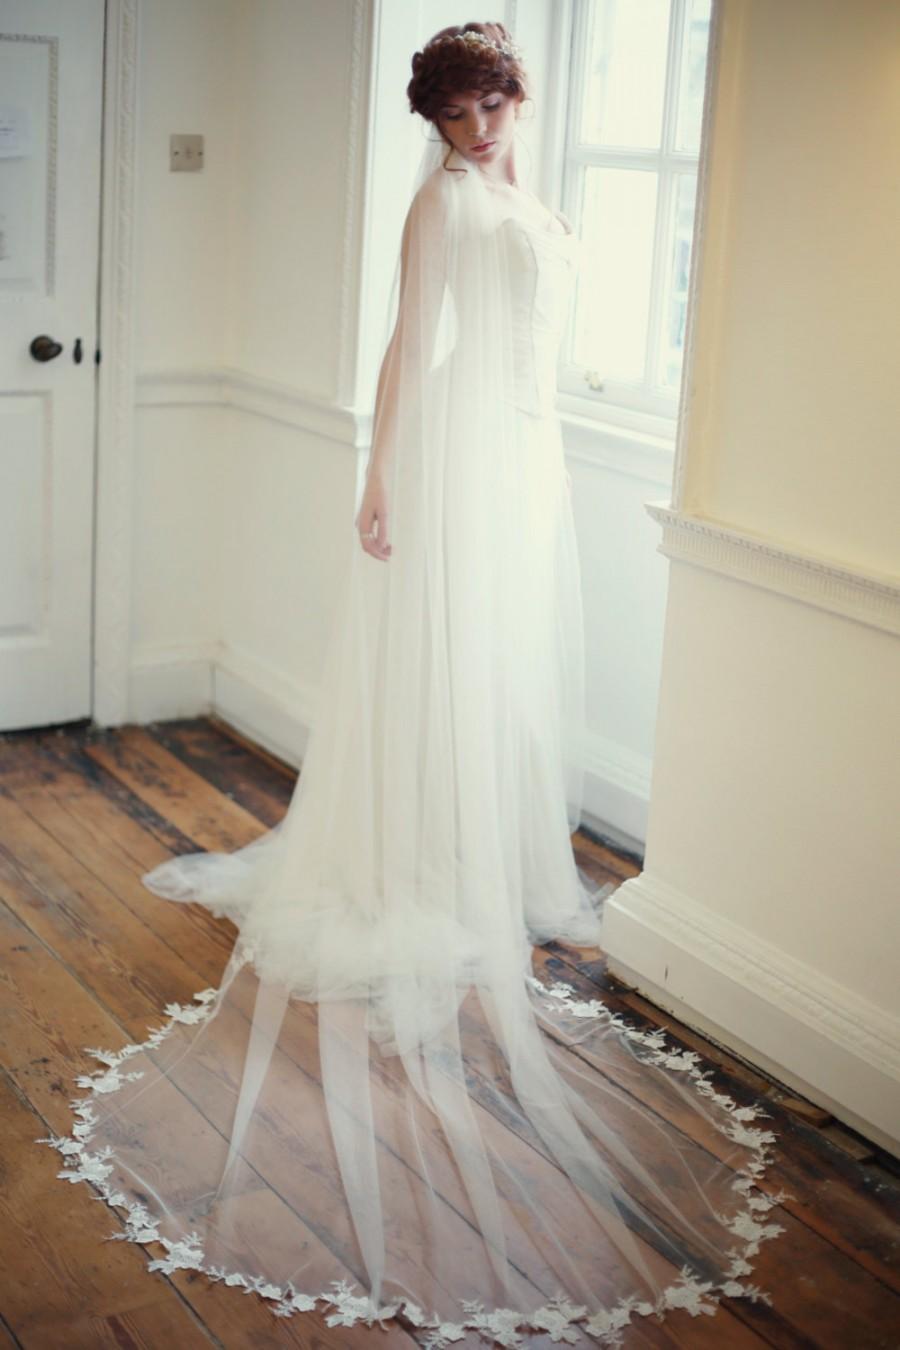 Wedding - Long lace veil with ethereal, hand pieced floral lace edging - pale ivory